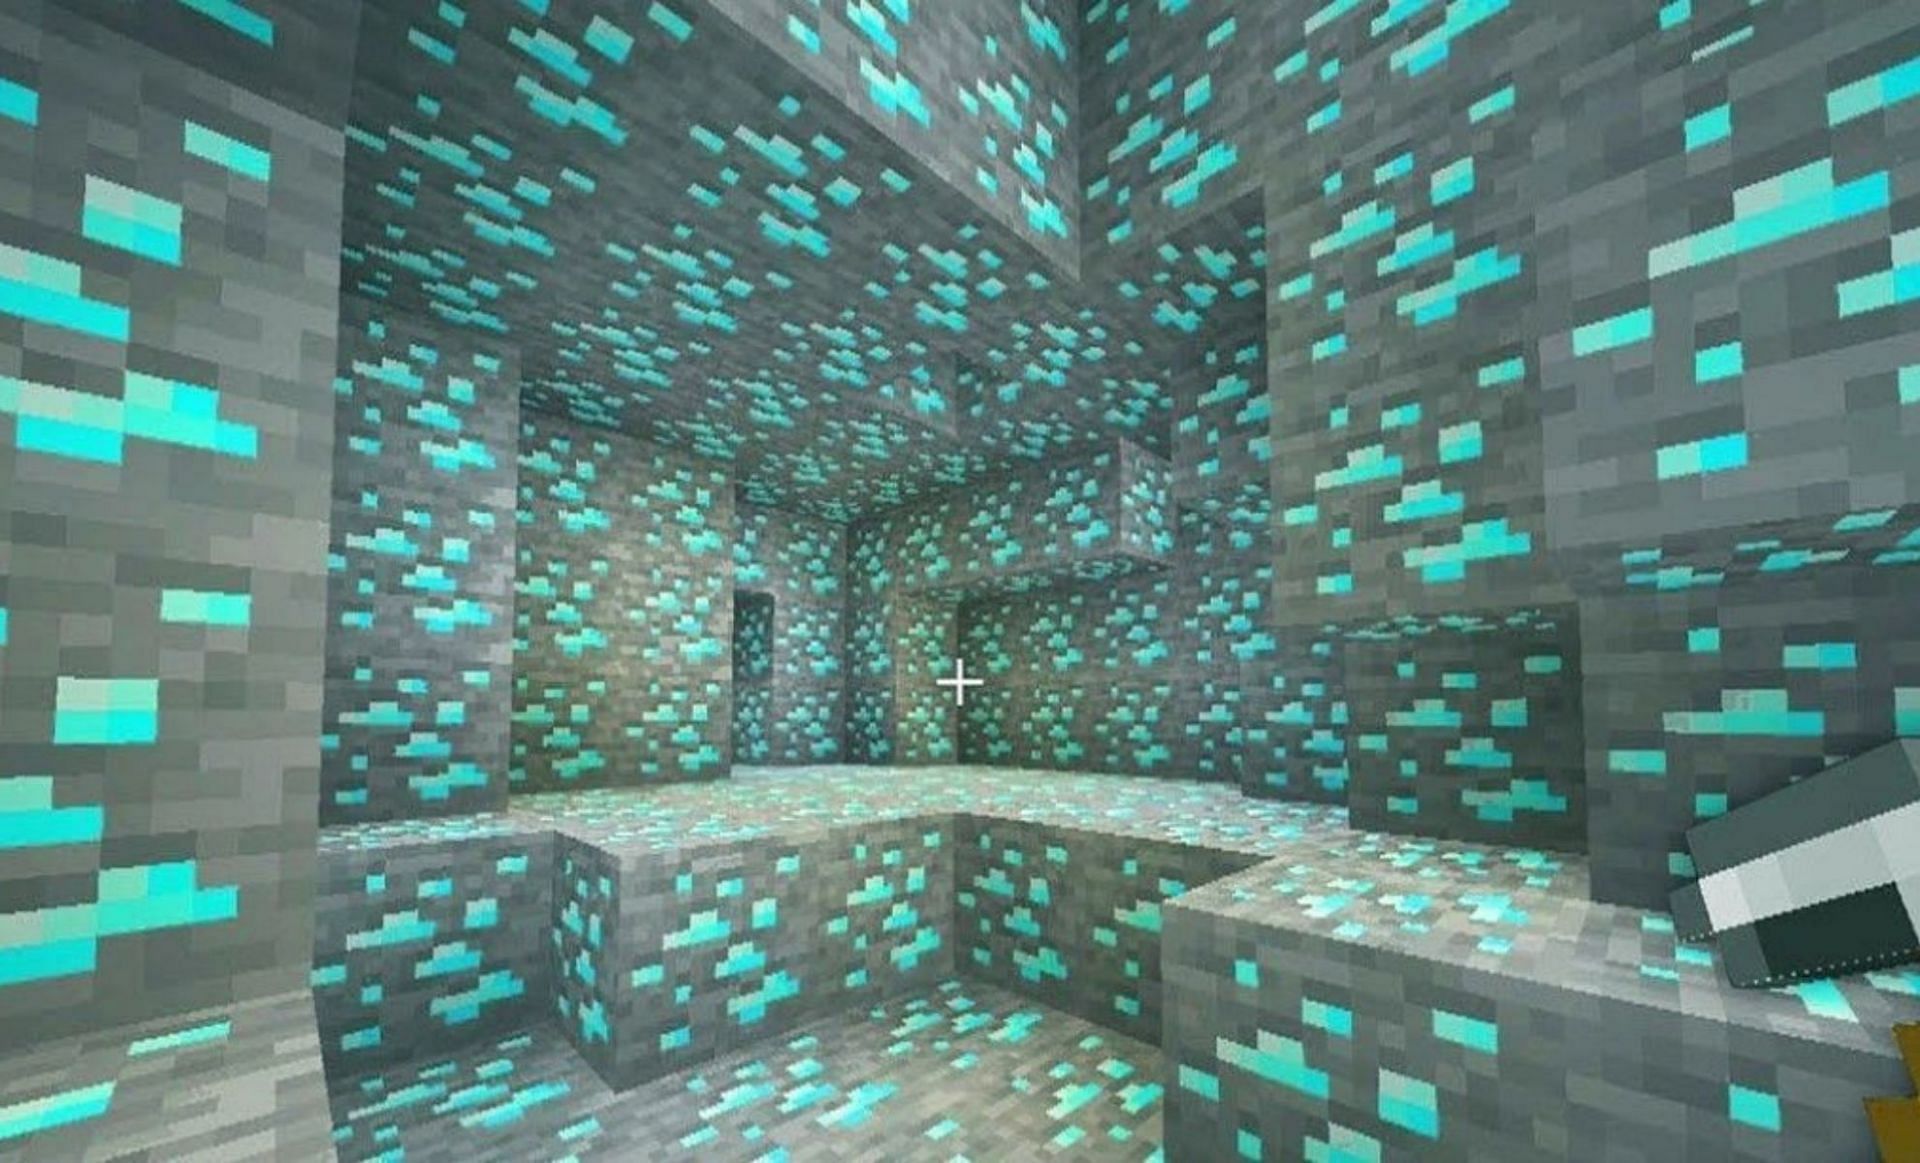 Diamonds in Minecraft (Image via DailyNation Today)